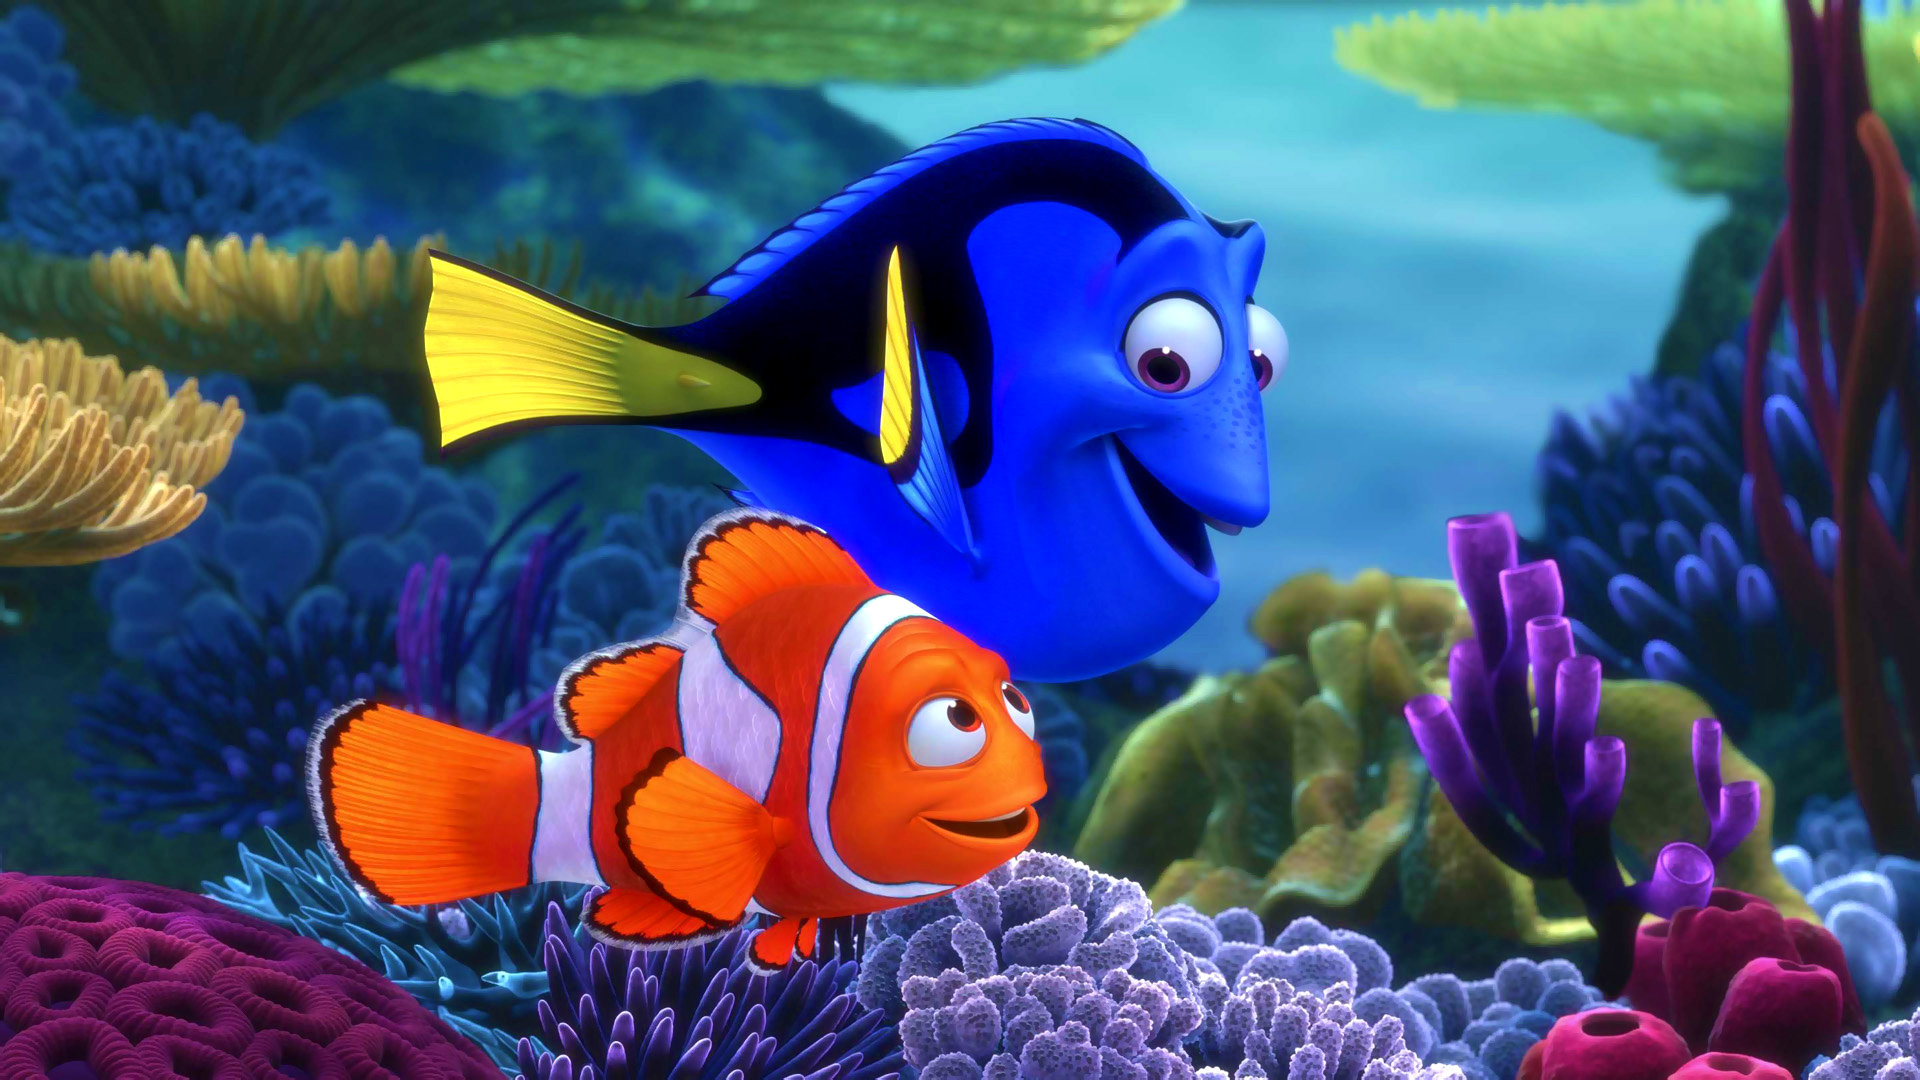 Download full hd 1920x1080 Finding Nemo PC wallpaper ID:53321 for free